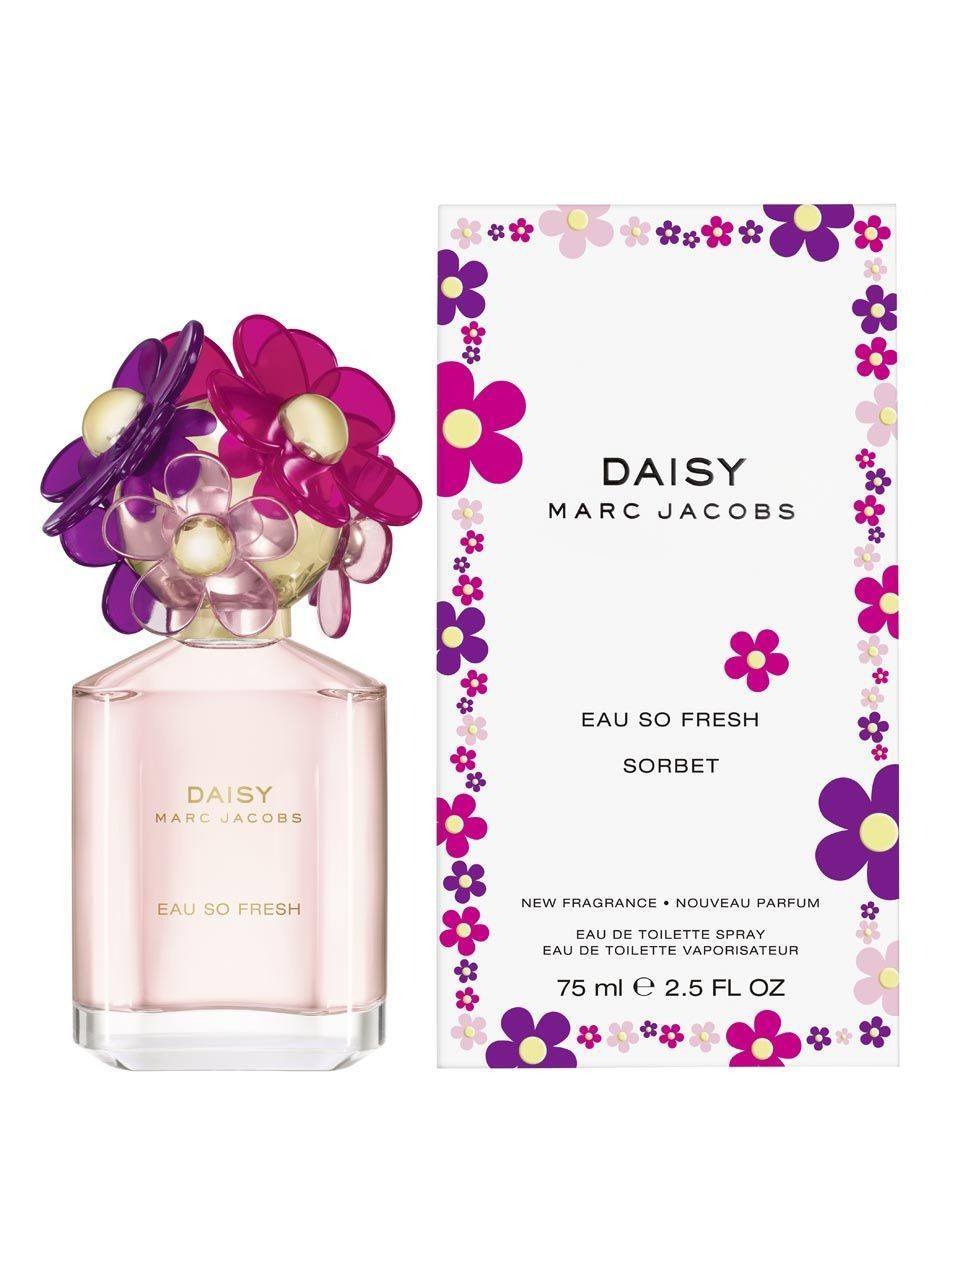 Introduced in 2015. Marc Jacobs presents new limited flankers of the fragrances Daisy (2007) and Daisy Eau So Fresh (2011) as Sorbet Editions. Sorbet Editions are promising colorful, delicate and fresh scents.<br><br>Daisy Eau So Fresh Sorbet is also created by Richard Herpin. The top notes are mandarin, apple blossom and lotus. The heart is composed of magnolia, jasmine and violet. Delicate and creamy woods and musk form the base of the perfume. It is available as 75 ml Eau de Toilette.